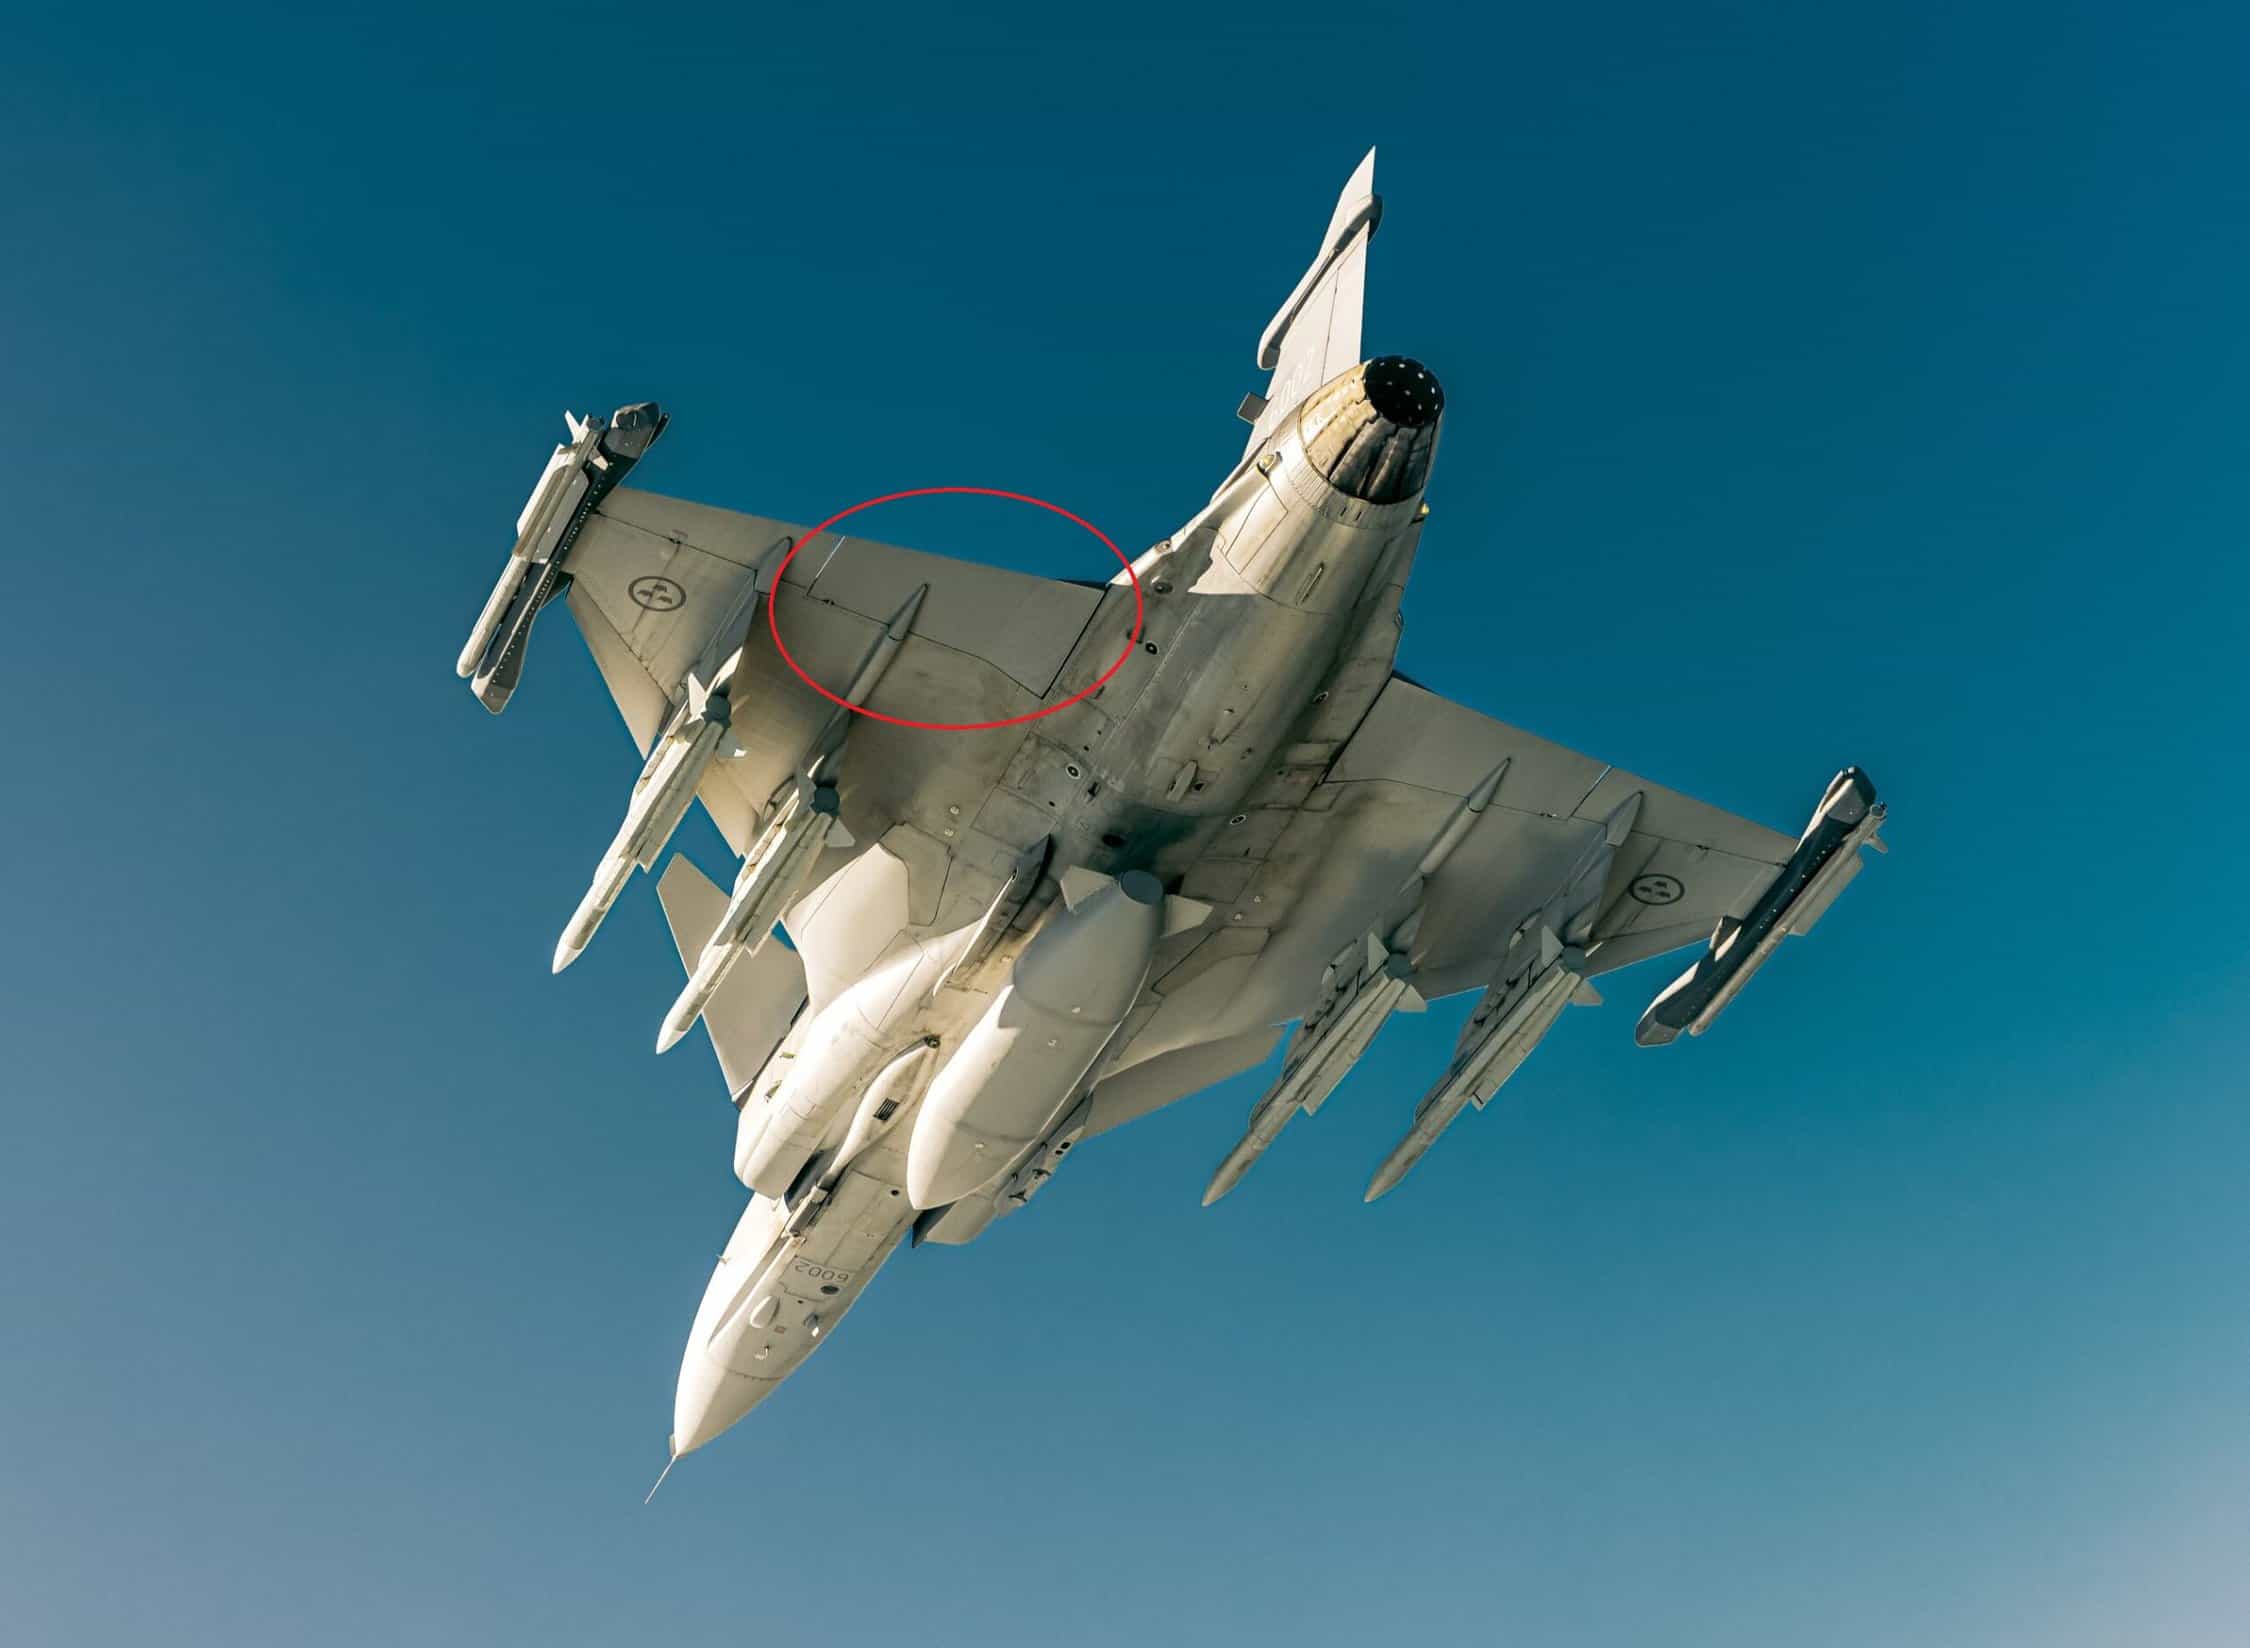 Saab modified the Gripen's elevons, increasing its maneuverability at low speeds. Photo: Saab.